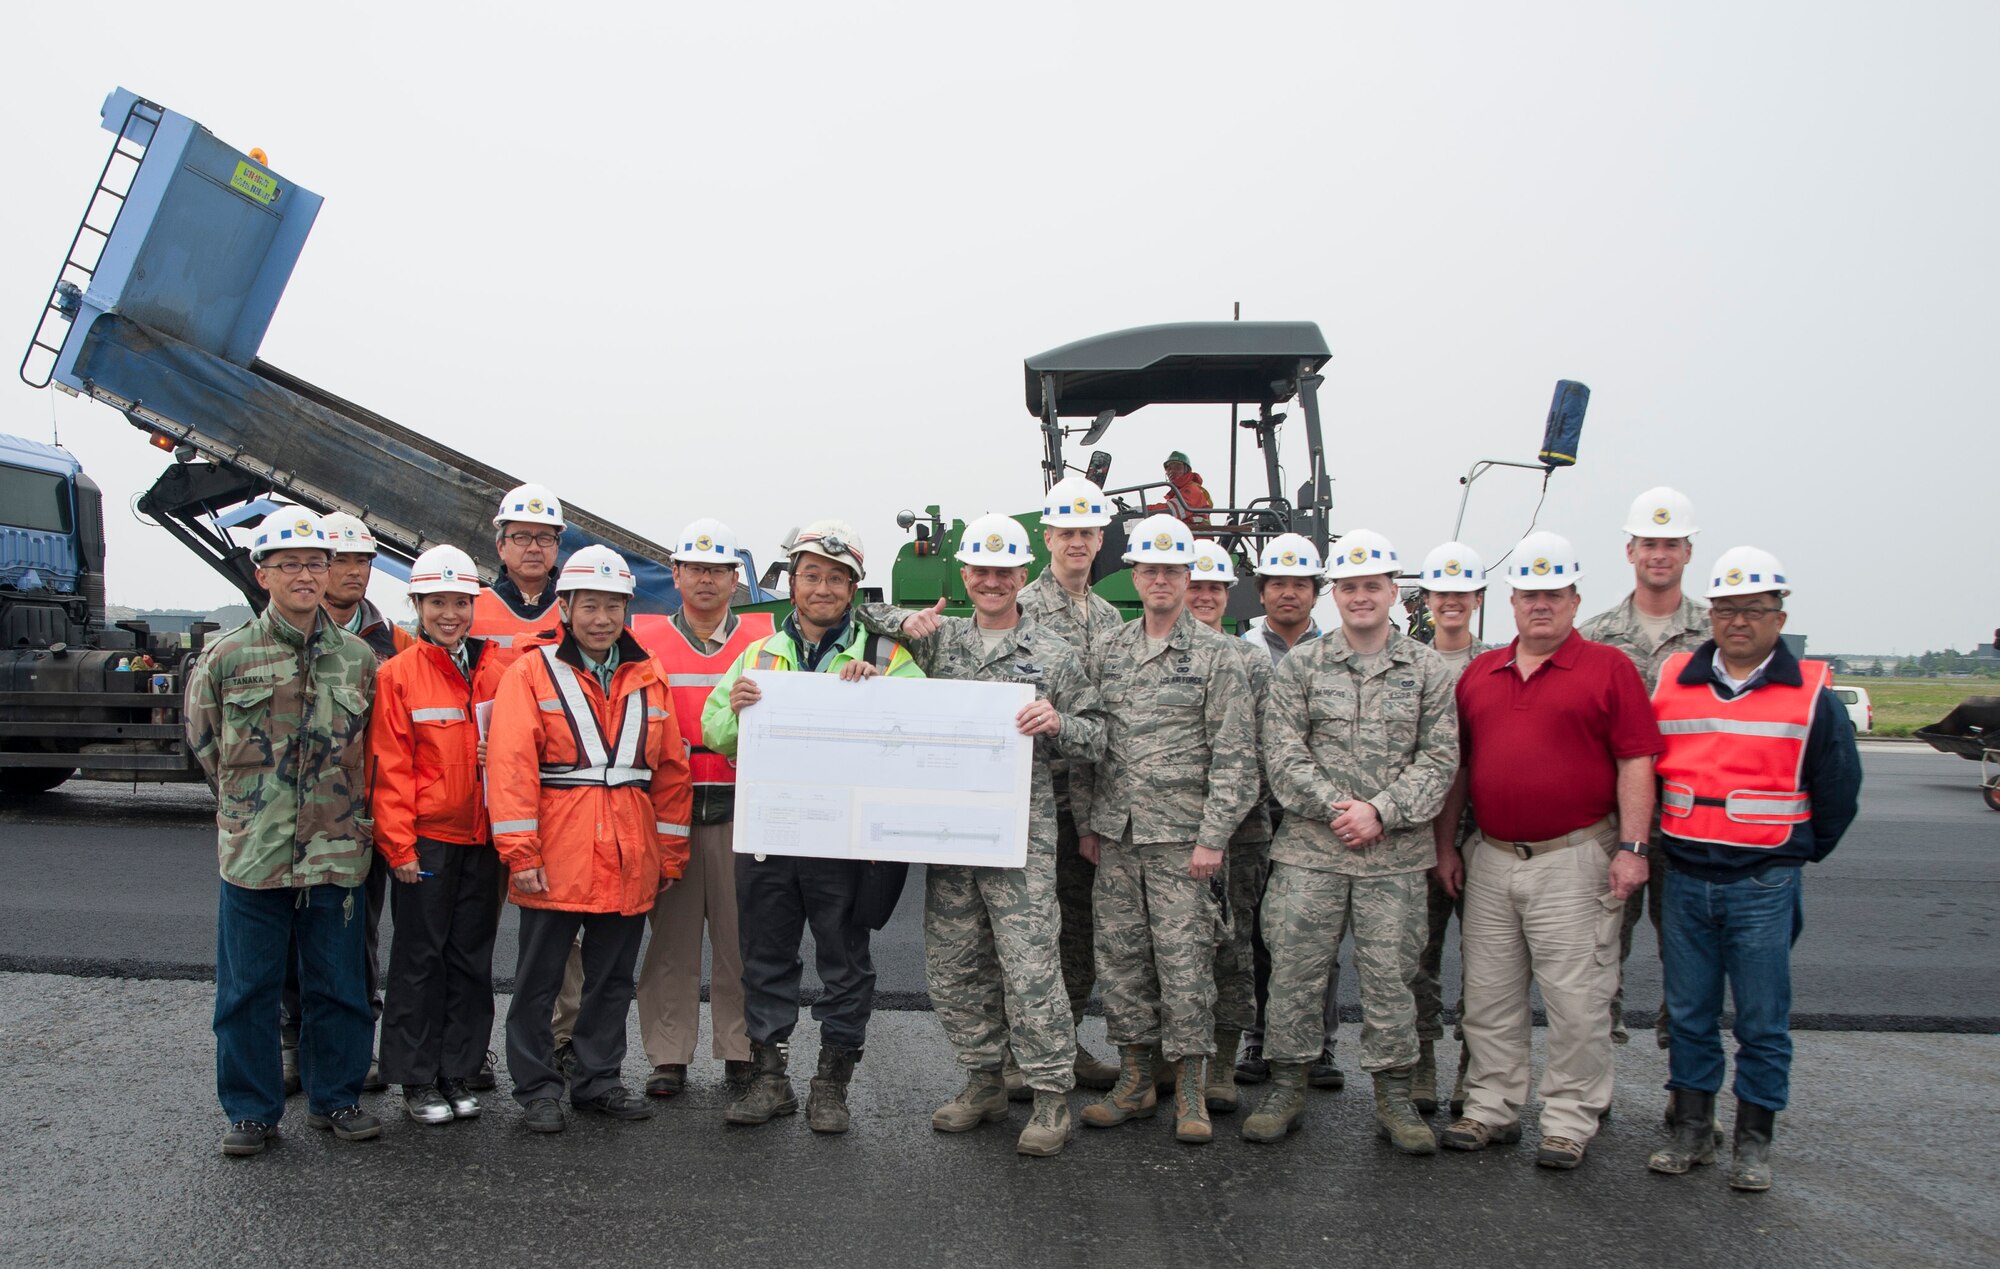 U.S. Air Force Col. R. Scott Jobe, the 35th Fighter Wing commander, pauses for a photo with construction site leaders at Misawa Air Base, Japan, May 25, 2017. Several shops came together to revitalize the airfield. The 35th Civil Engineer Squadron worked with Japanese contractors to reconstruct the airfield, allowing the enhancement of future operations while saving Air Force money. (U.S. Air Force photo by Staff Sgt. Melanie Hutto)